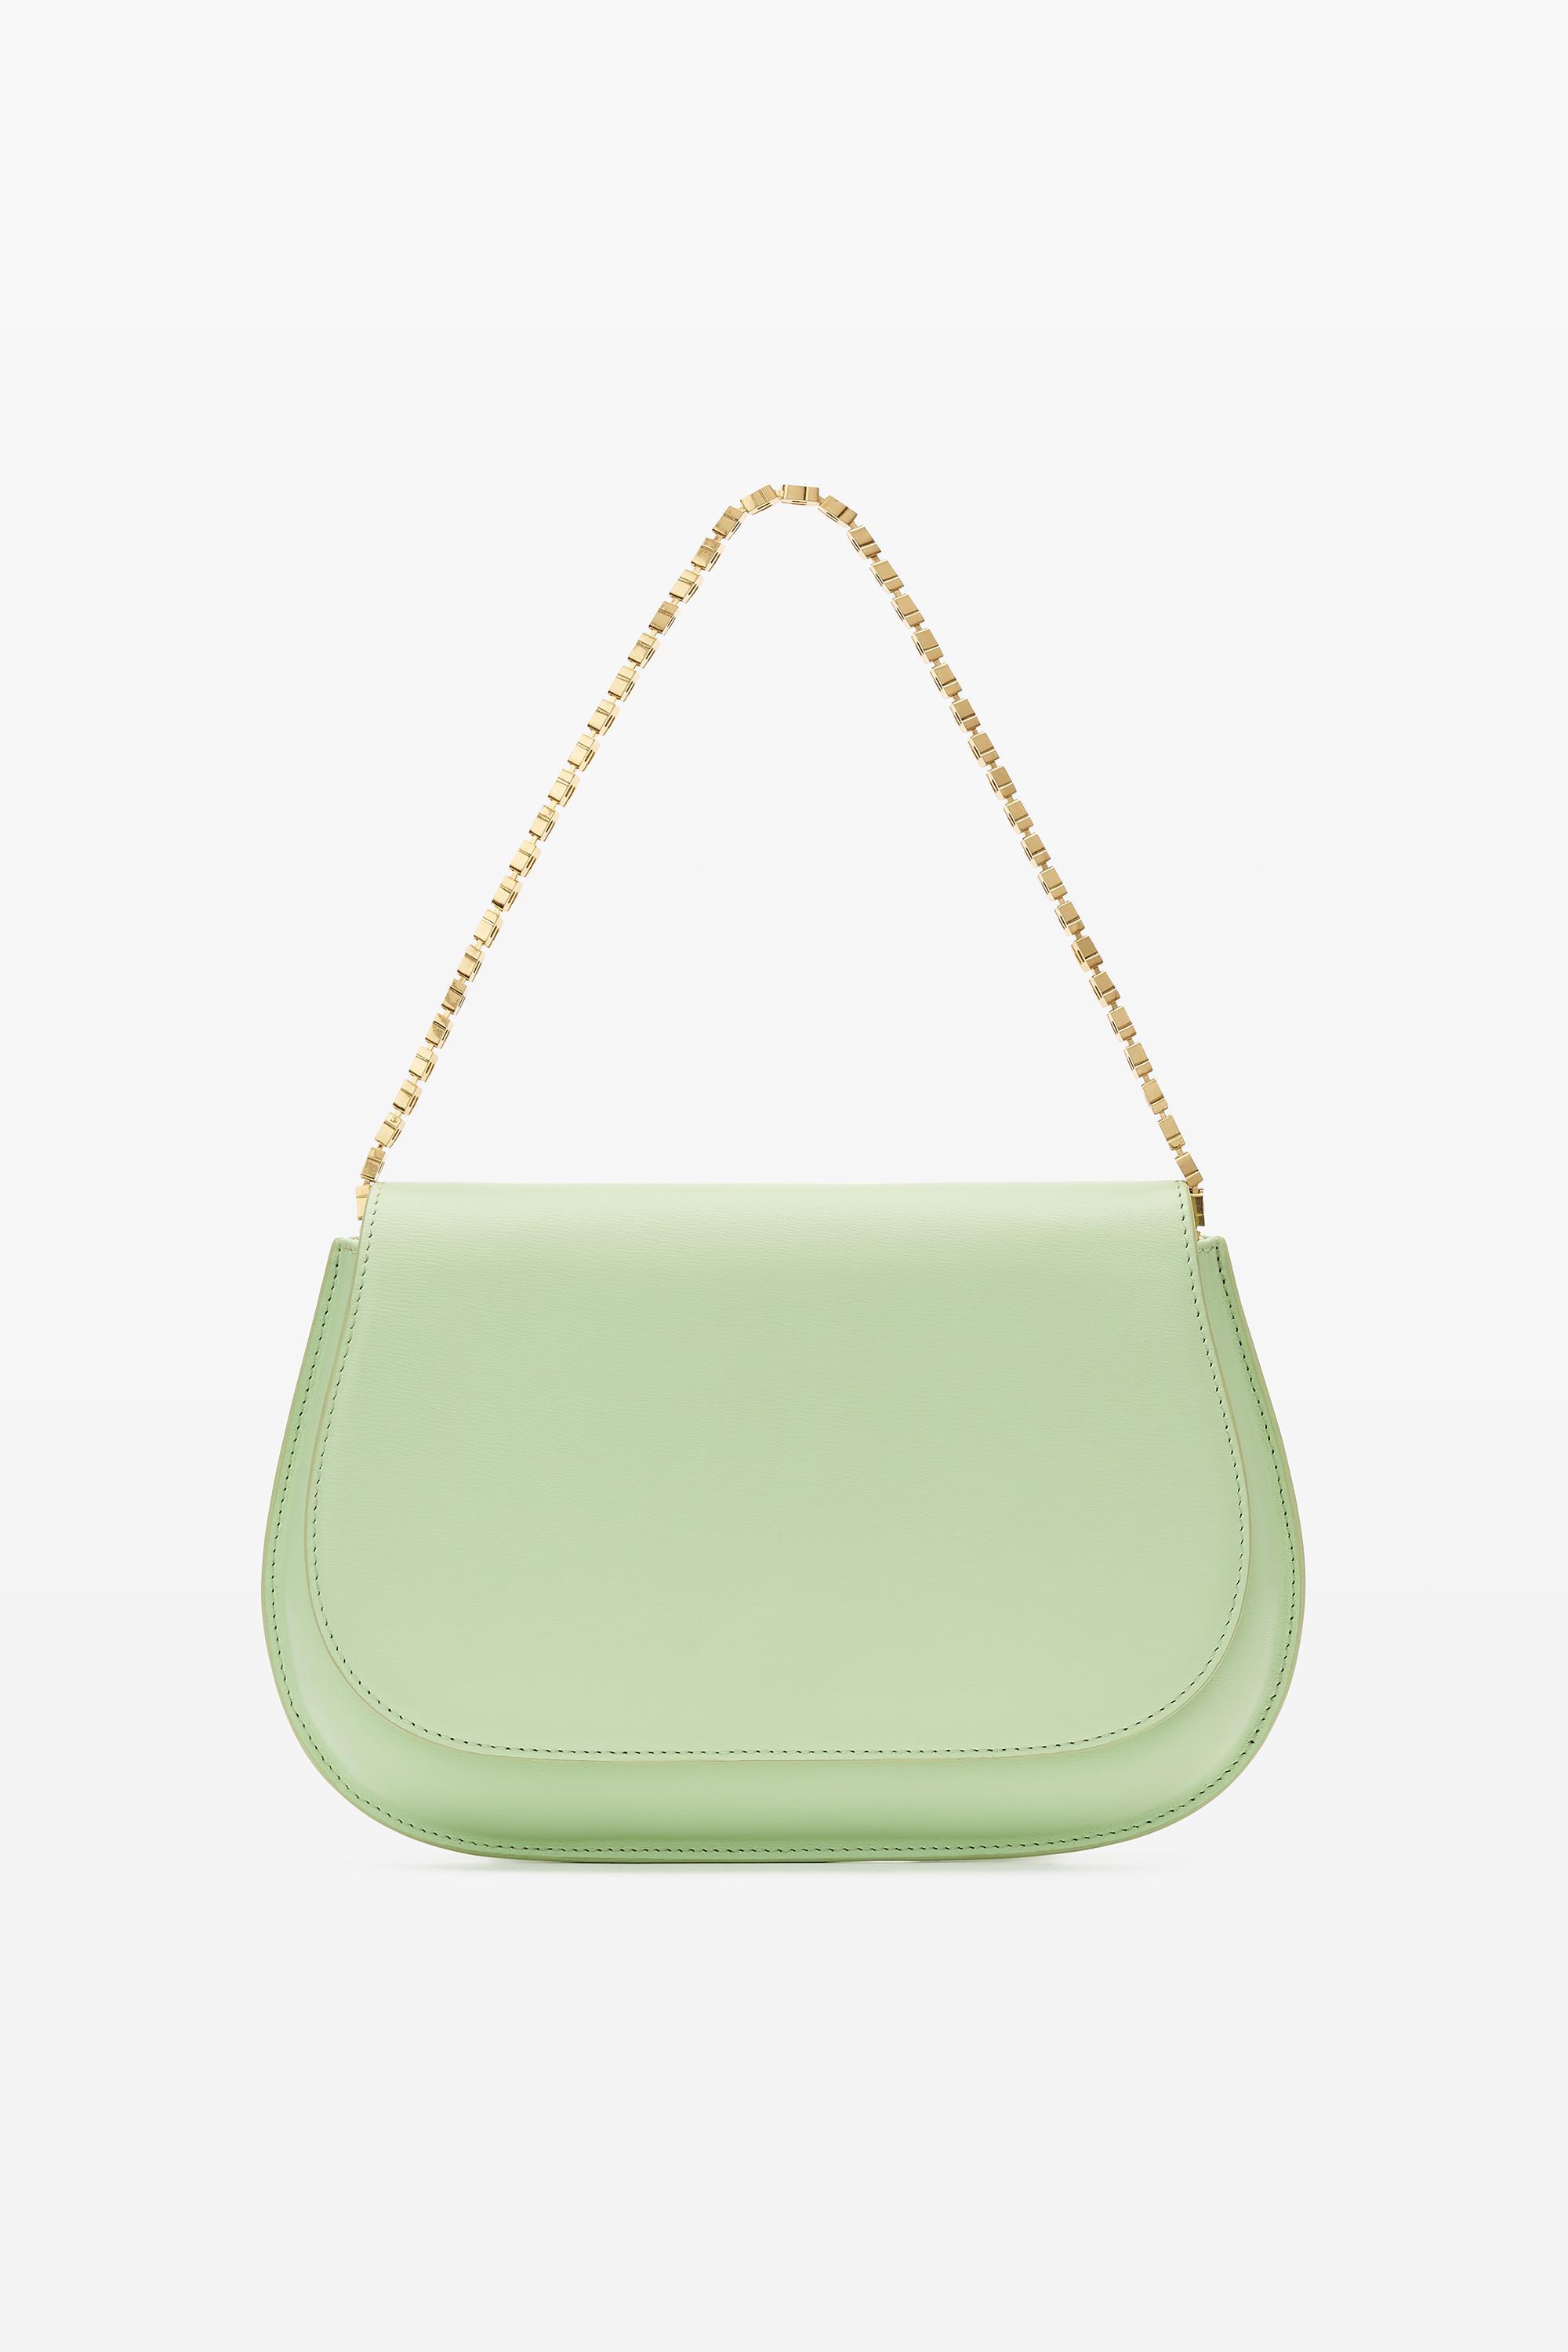 Alexander Wang Crest Flap Bag In Leather in Green | Lyst